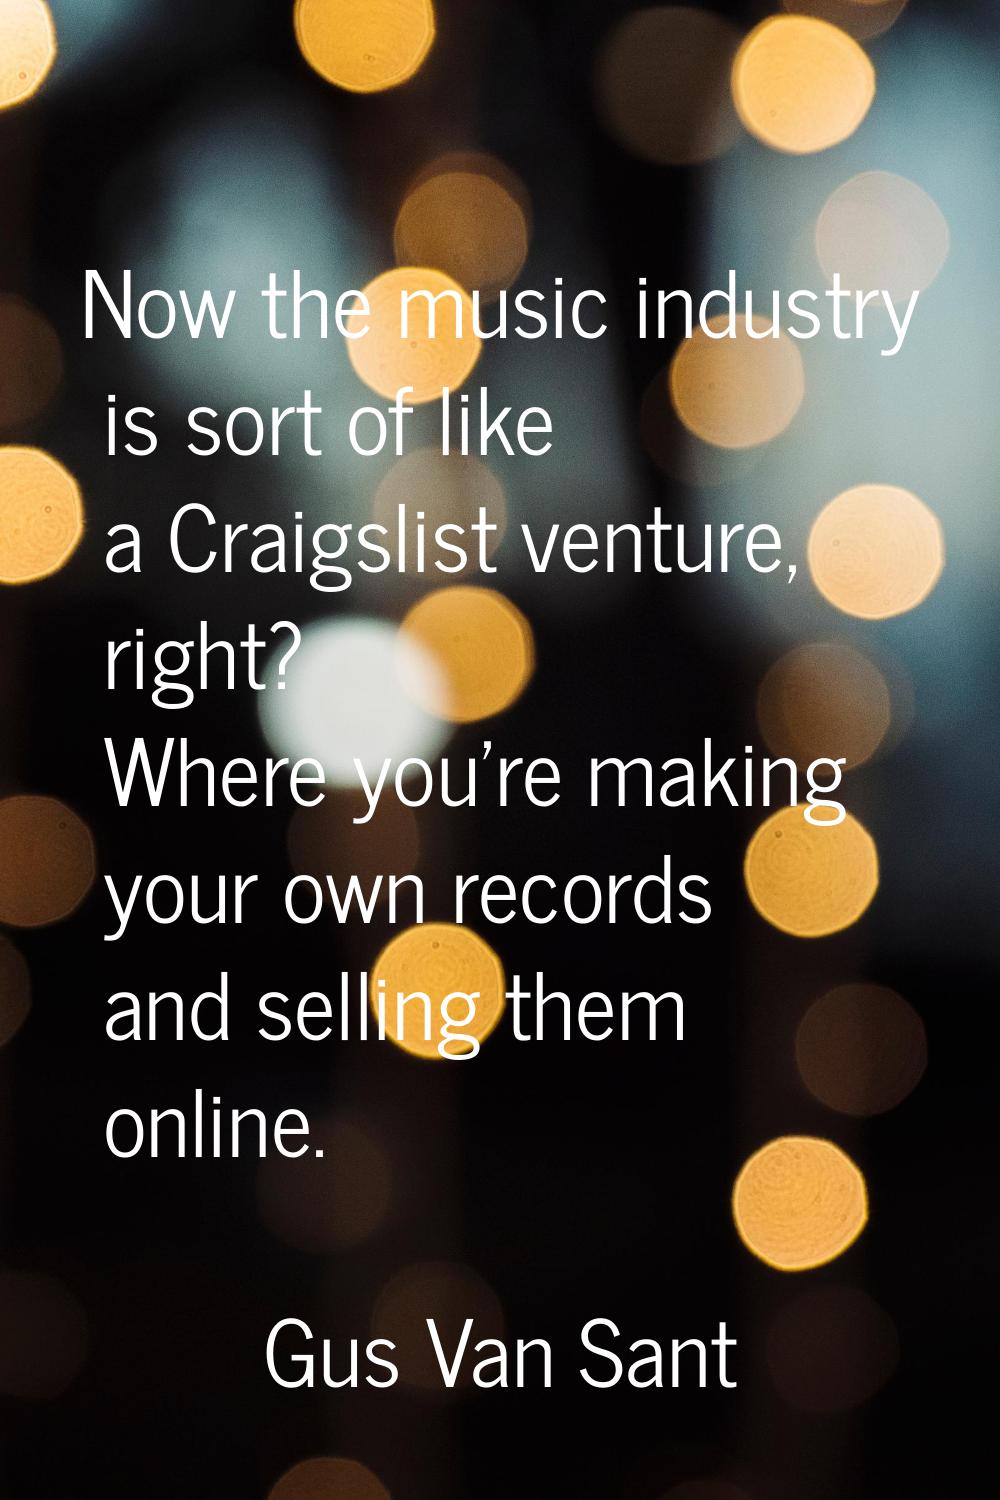 Now the music industry is sort of like a Craigslist venture, right? Where you're making your own re